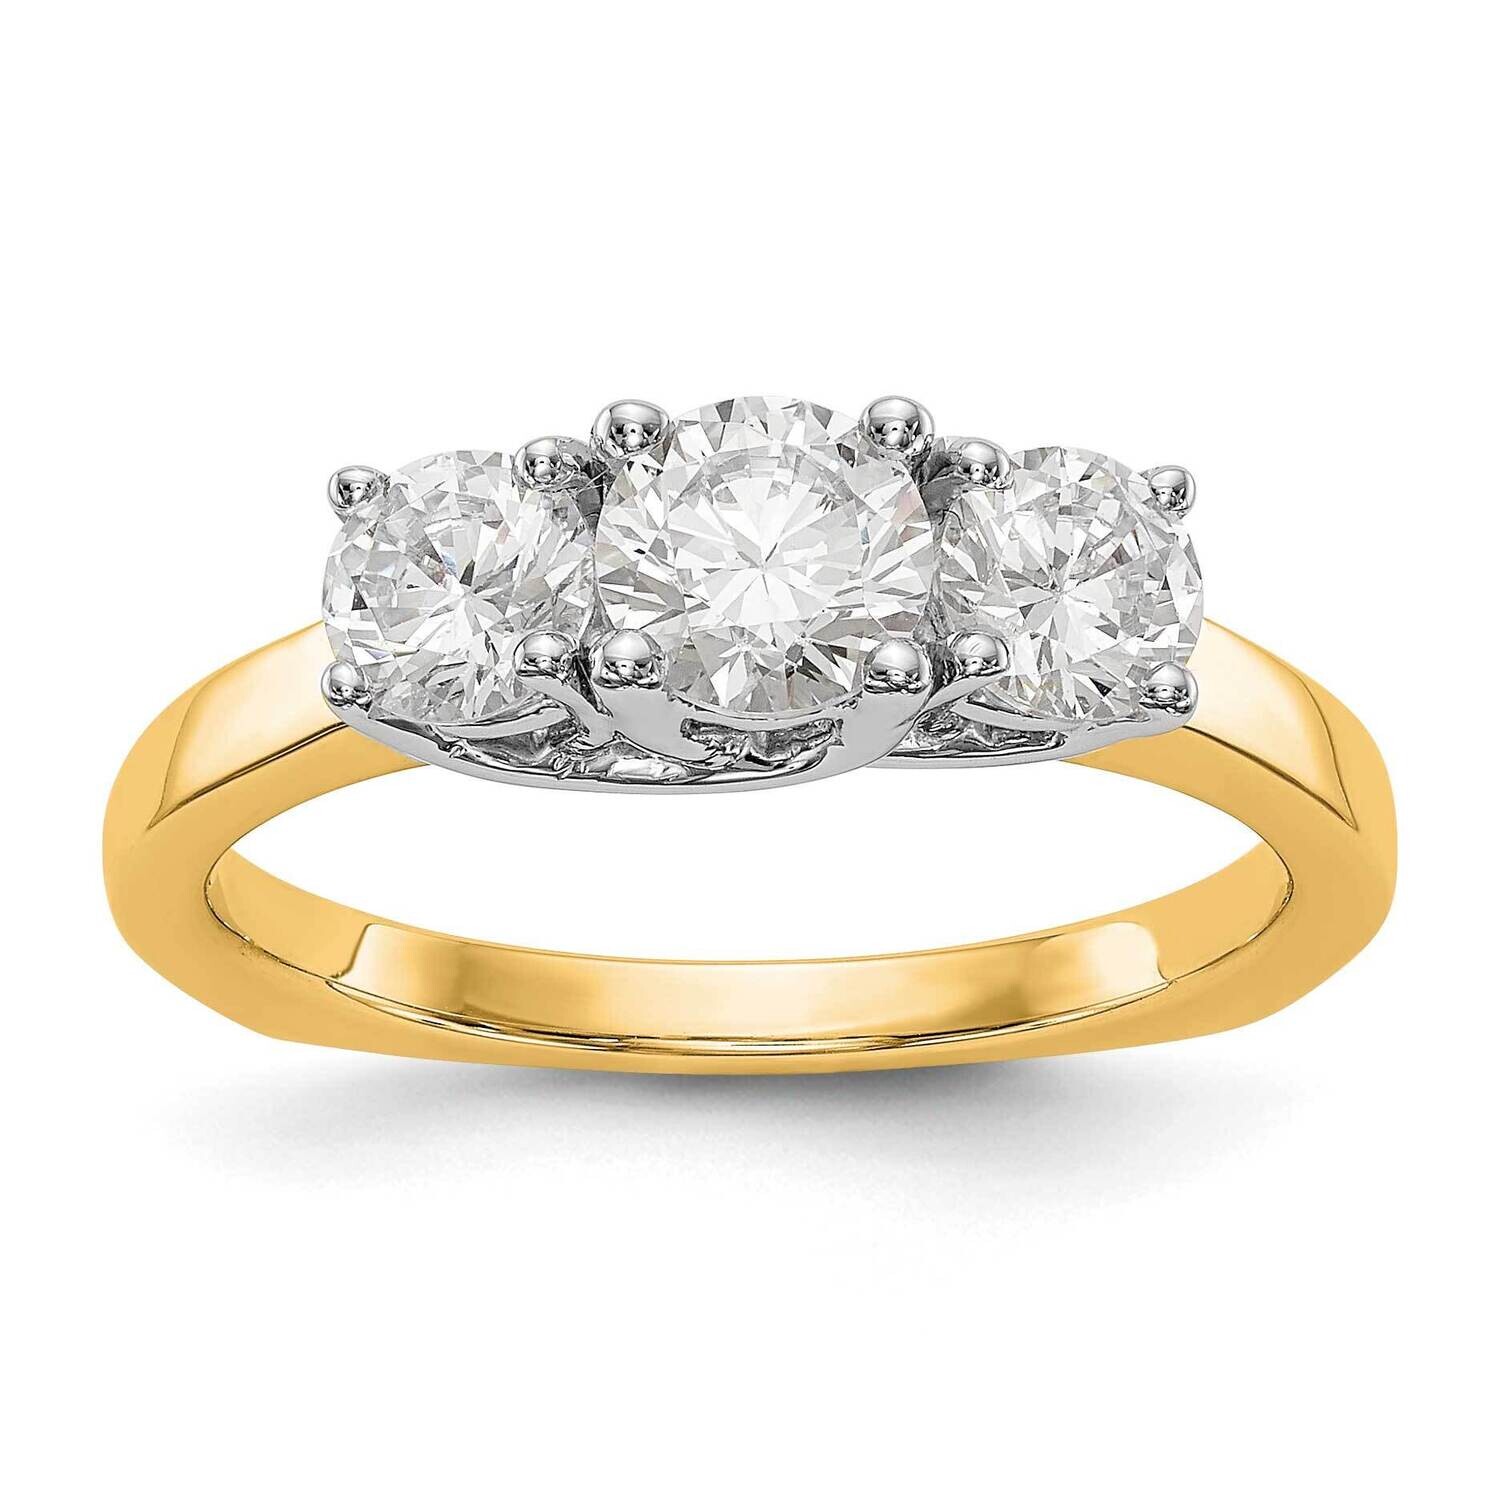 3-Stone Holds 1/2 Carat 5.2mm Round Center Includes 2-4.5mm Round Side Diamonds Semi-Mount Engagement Ring 14k Two-Tone Gold RM2953E-050/070-YWAA